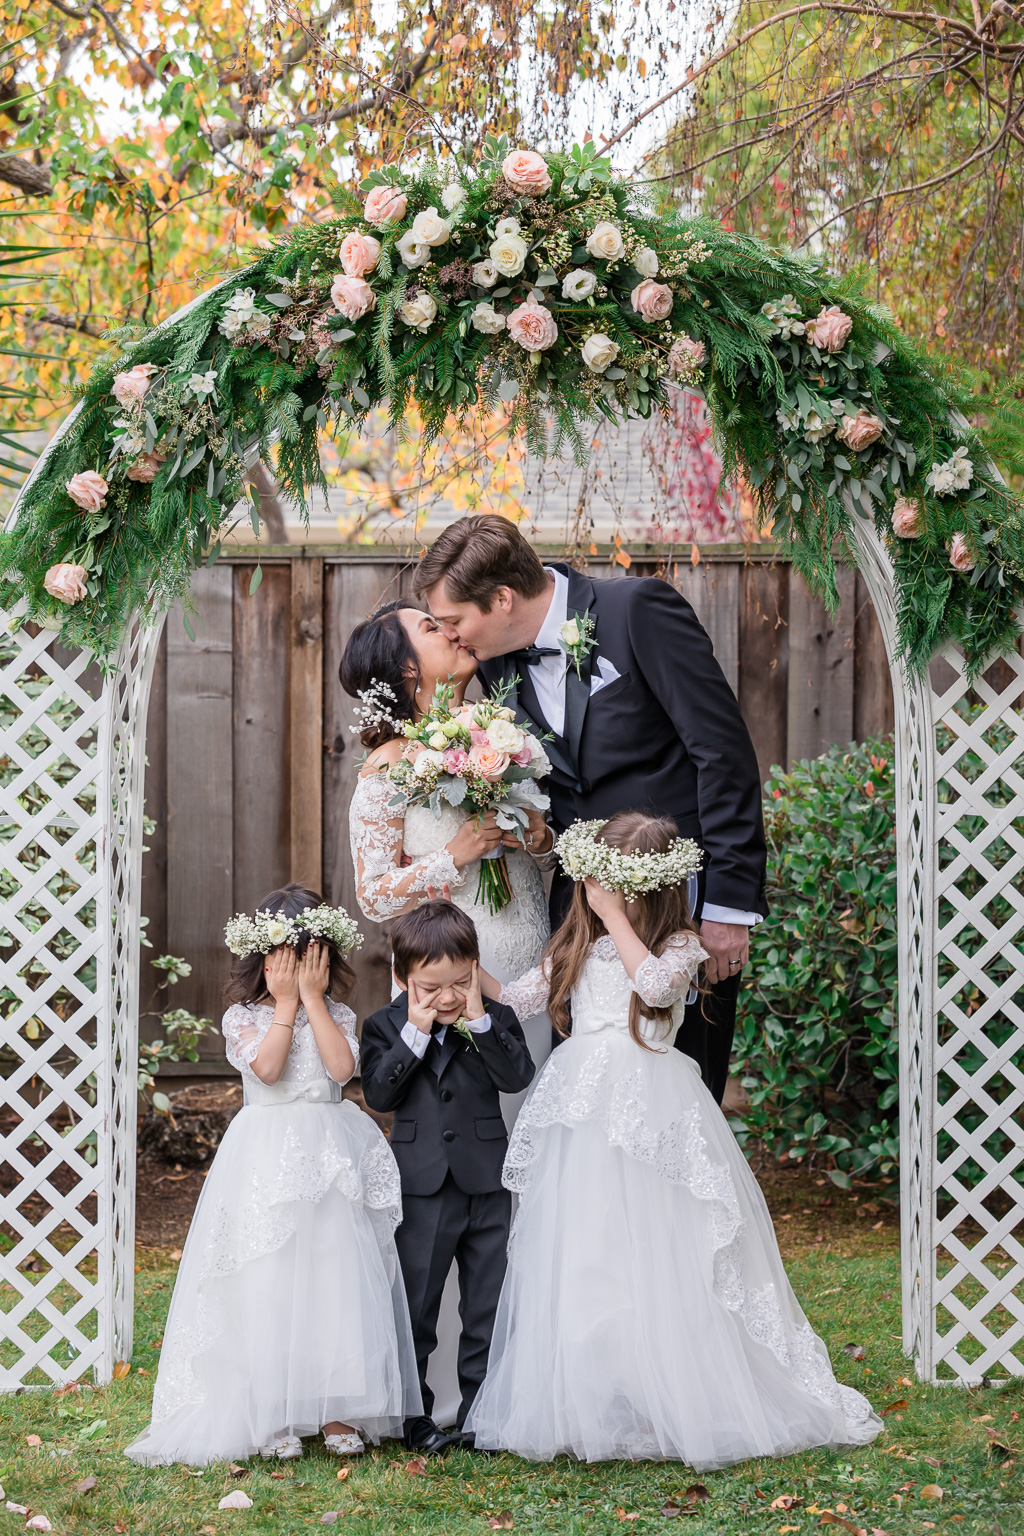 cute family photo with kids in front of wedding arbor arch